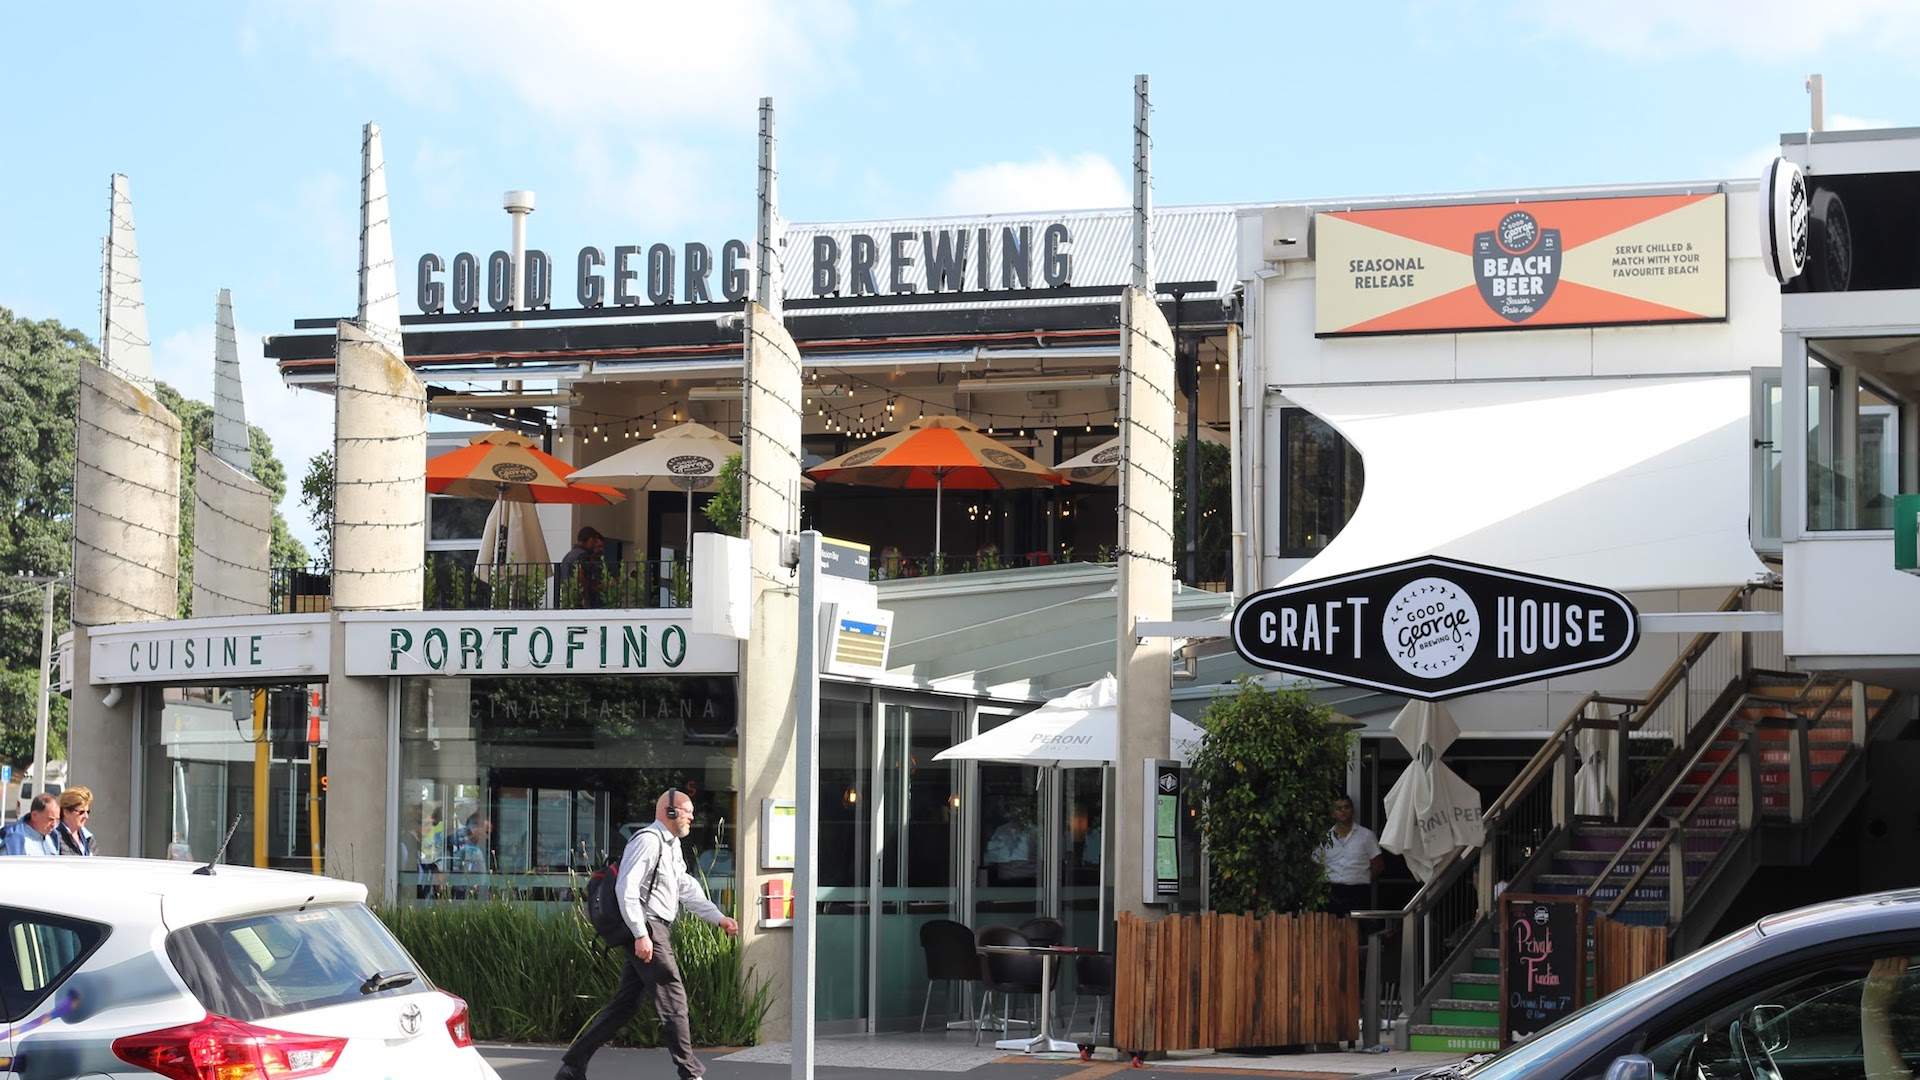 Hamilton Craft Brewery Good George Has Opened a Pub in Mission Bay